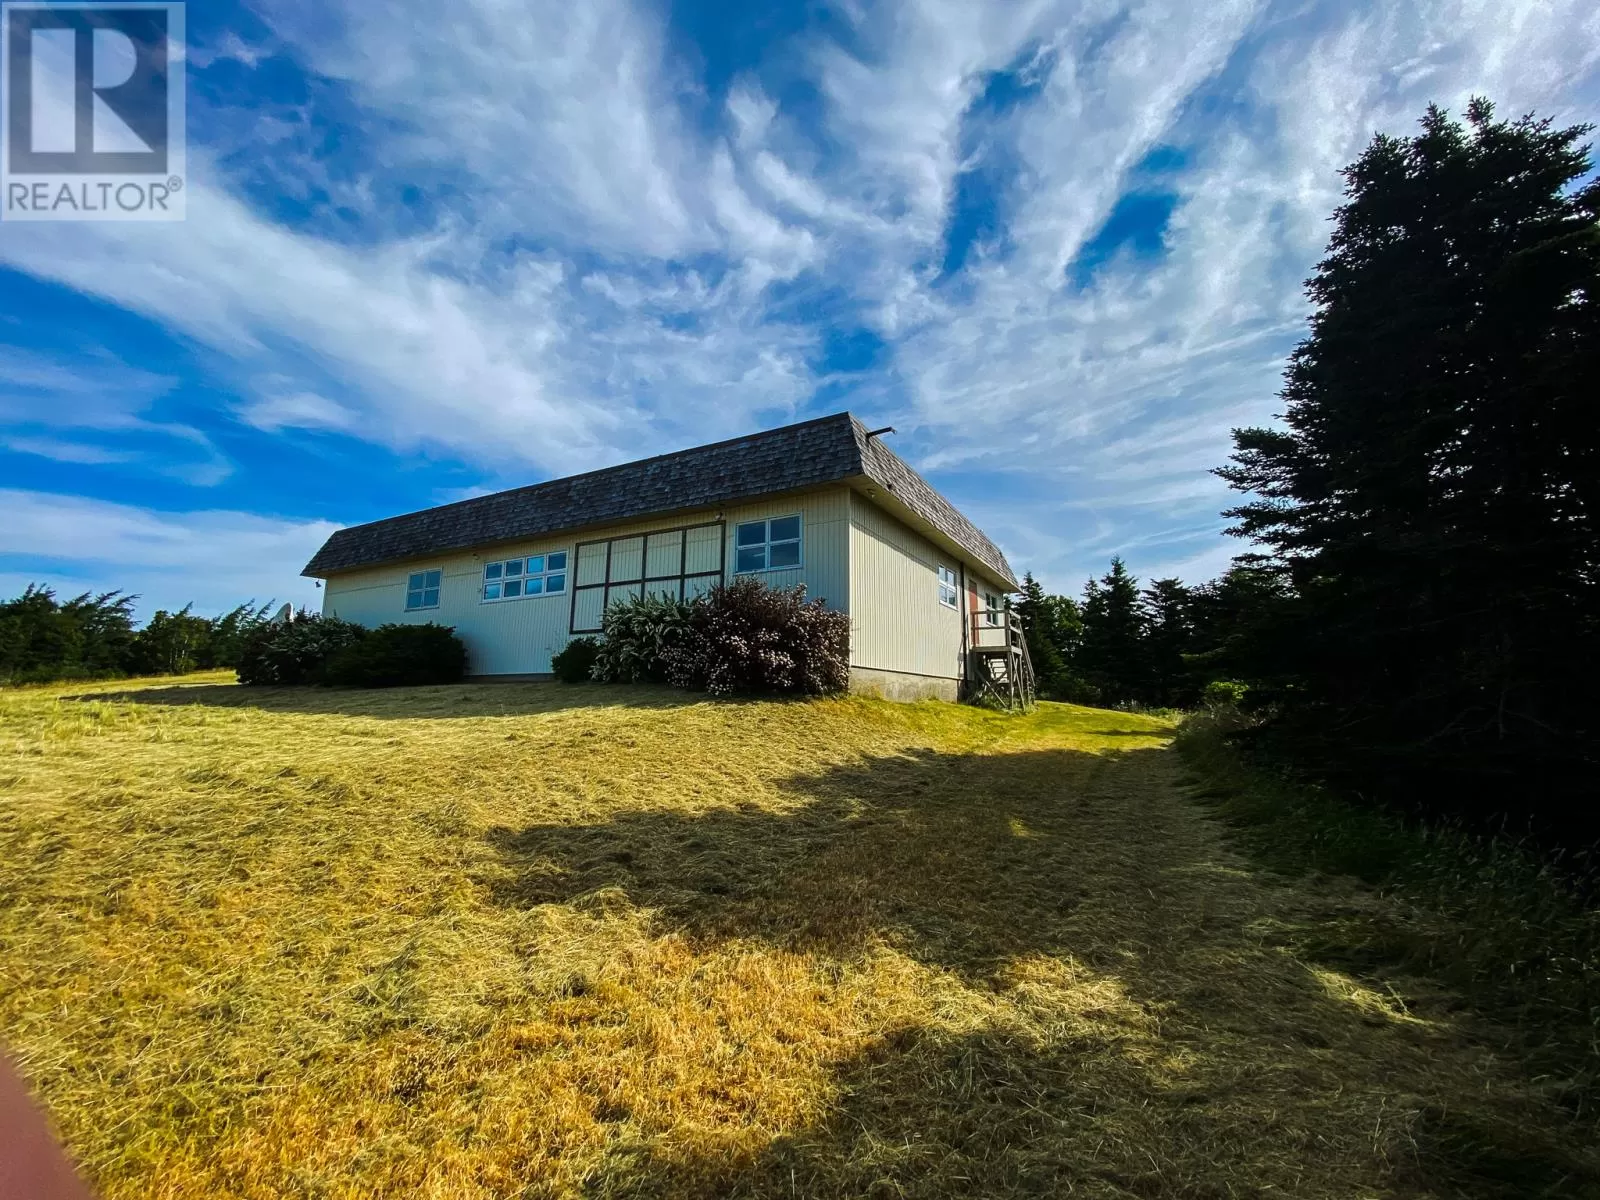 Other for rent: 1 Chvo Drive, Carbonear, Newfoundland & Labrador A1y 1A2